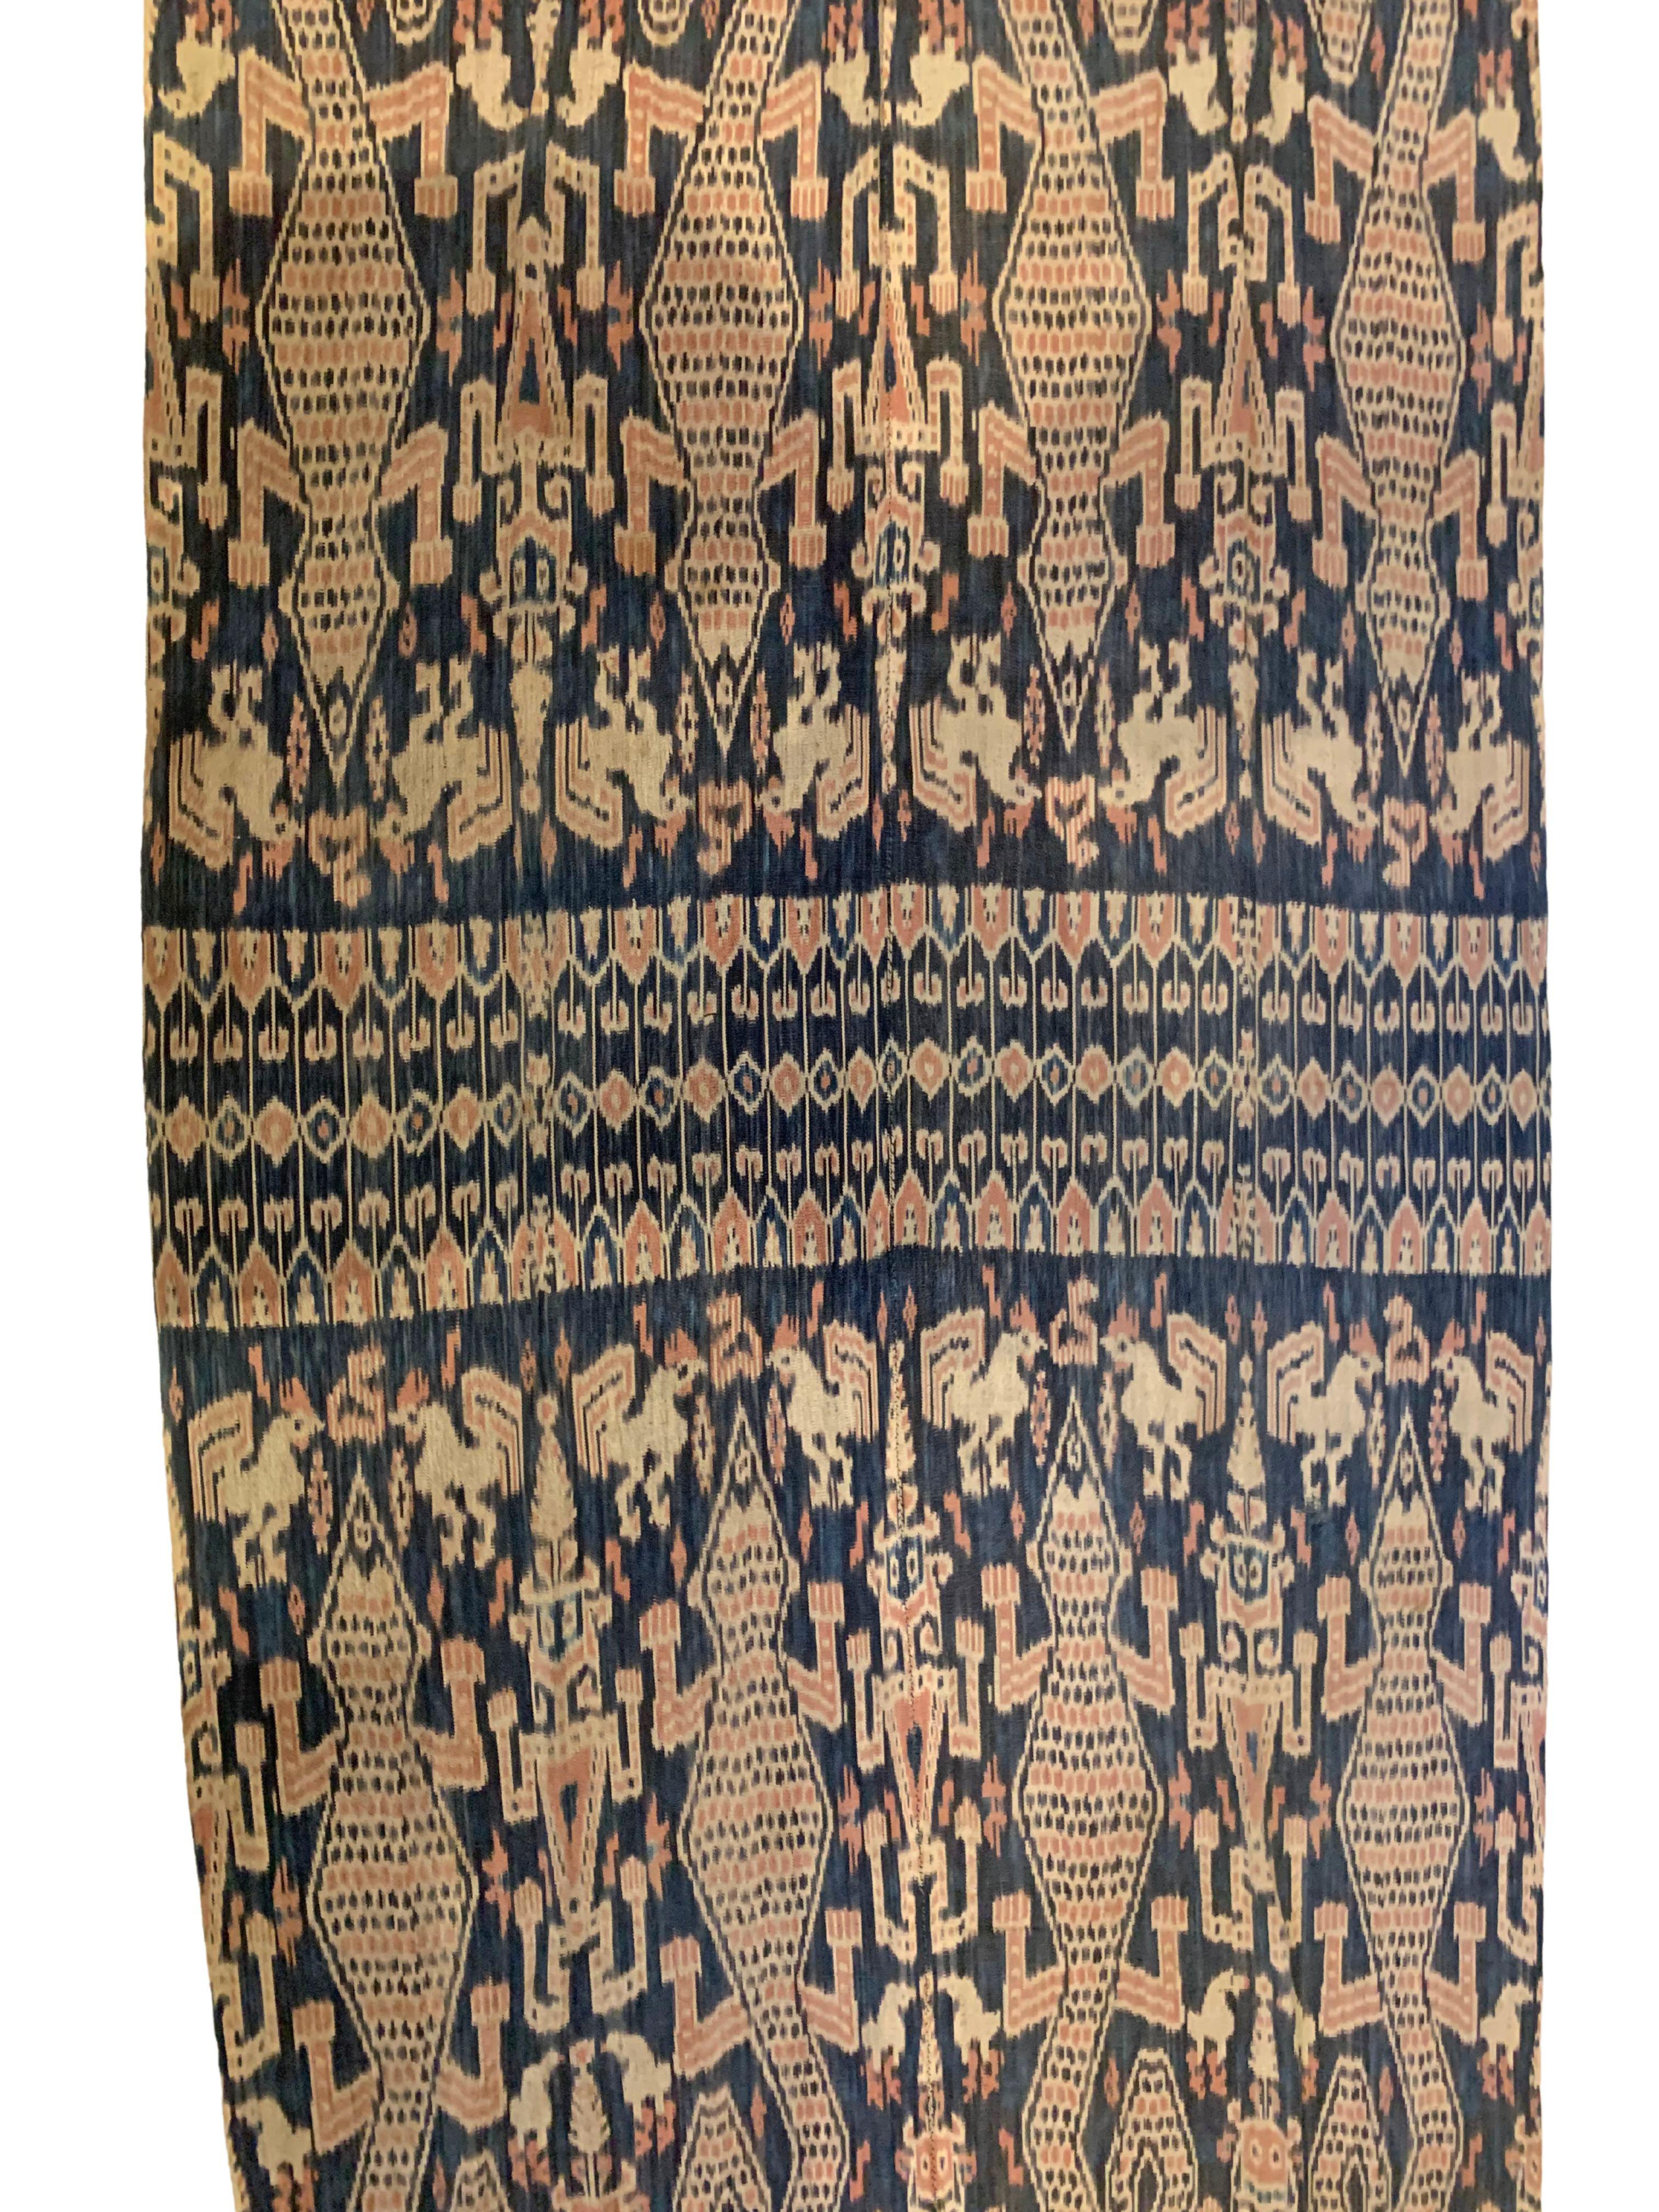 This Ikat textile originates from the Island of Sumba, Indonesia. It is hand-woven using naturally dyed yarns via a method passed on through generations. It features a stunning array of tribal patterns and motifs. Unique to this piece are the gecko